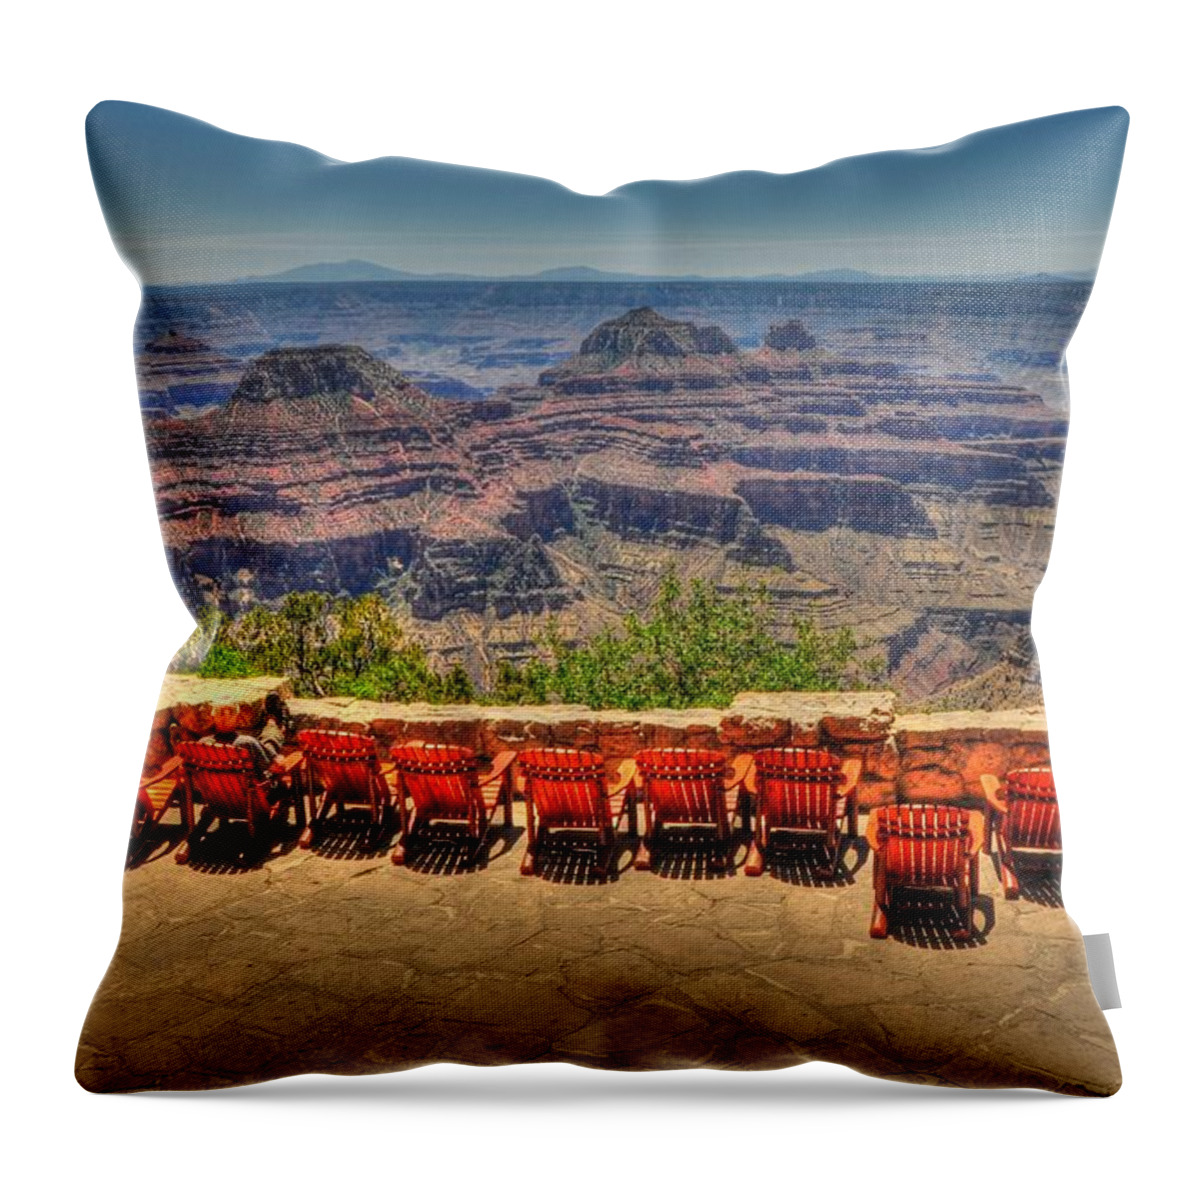 Grand Canyon Throw Pillow featuring the photograph View Deck - Grand Canyon Lodge - North Rim by Bruce Friedman